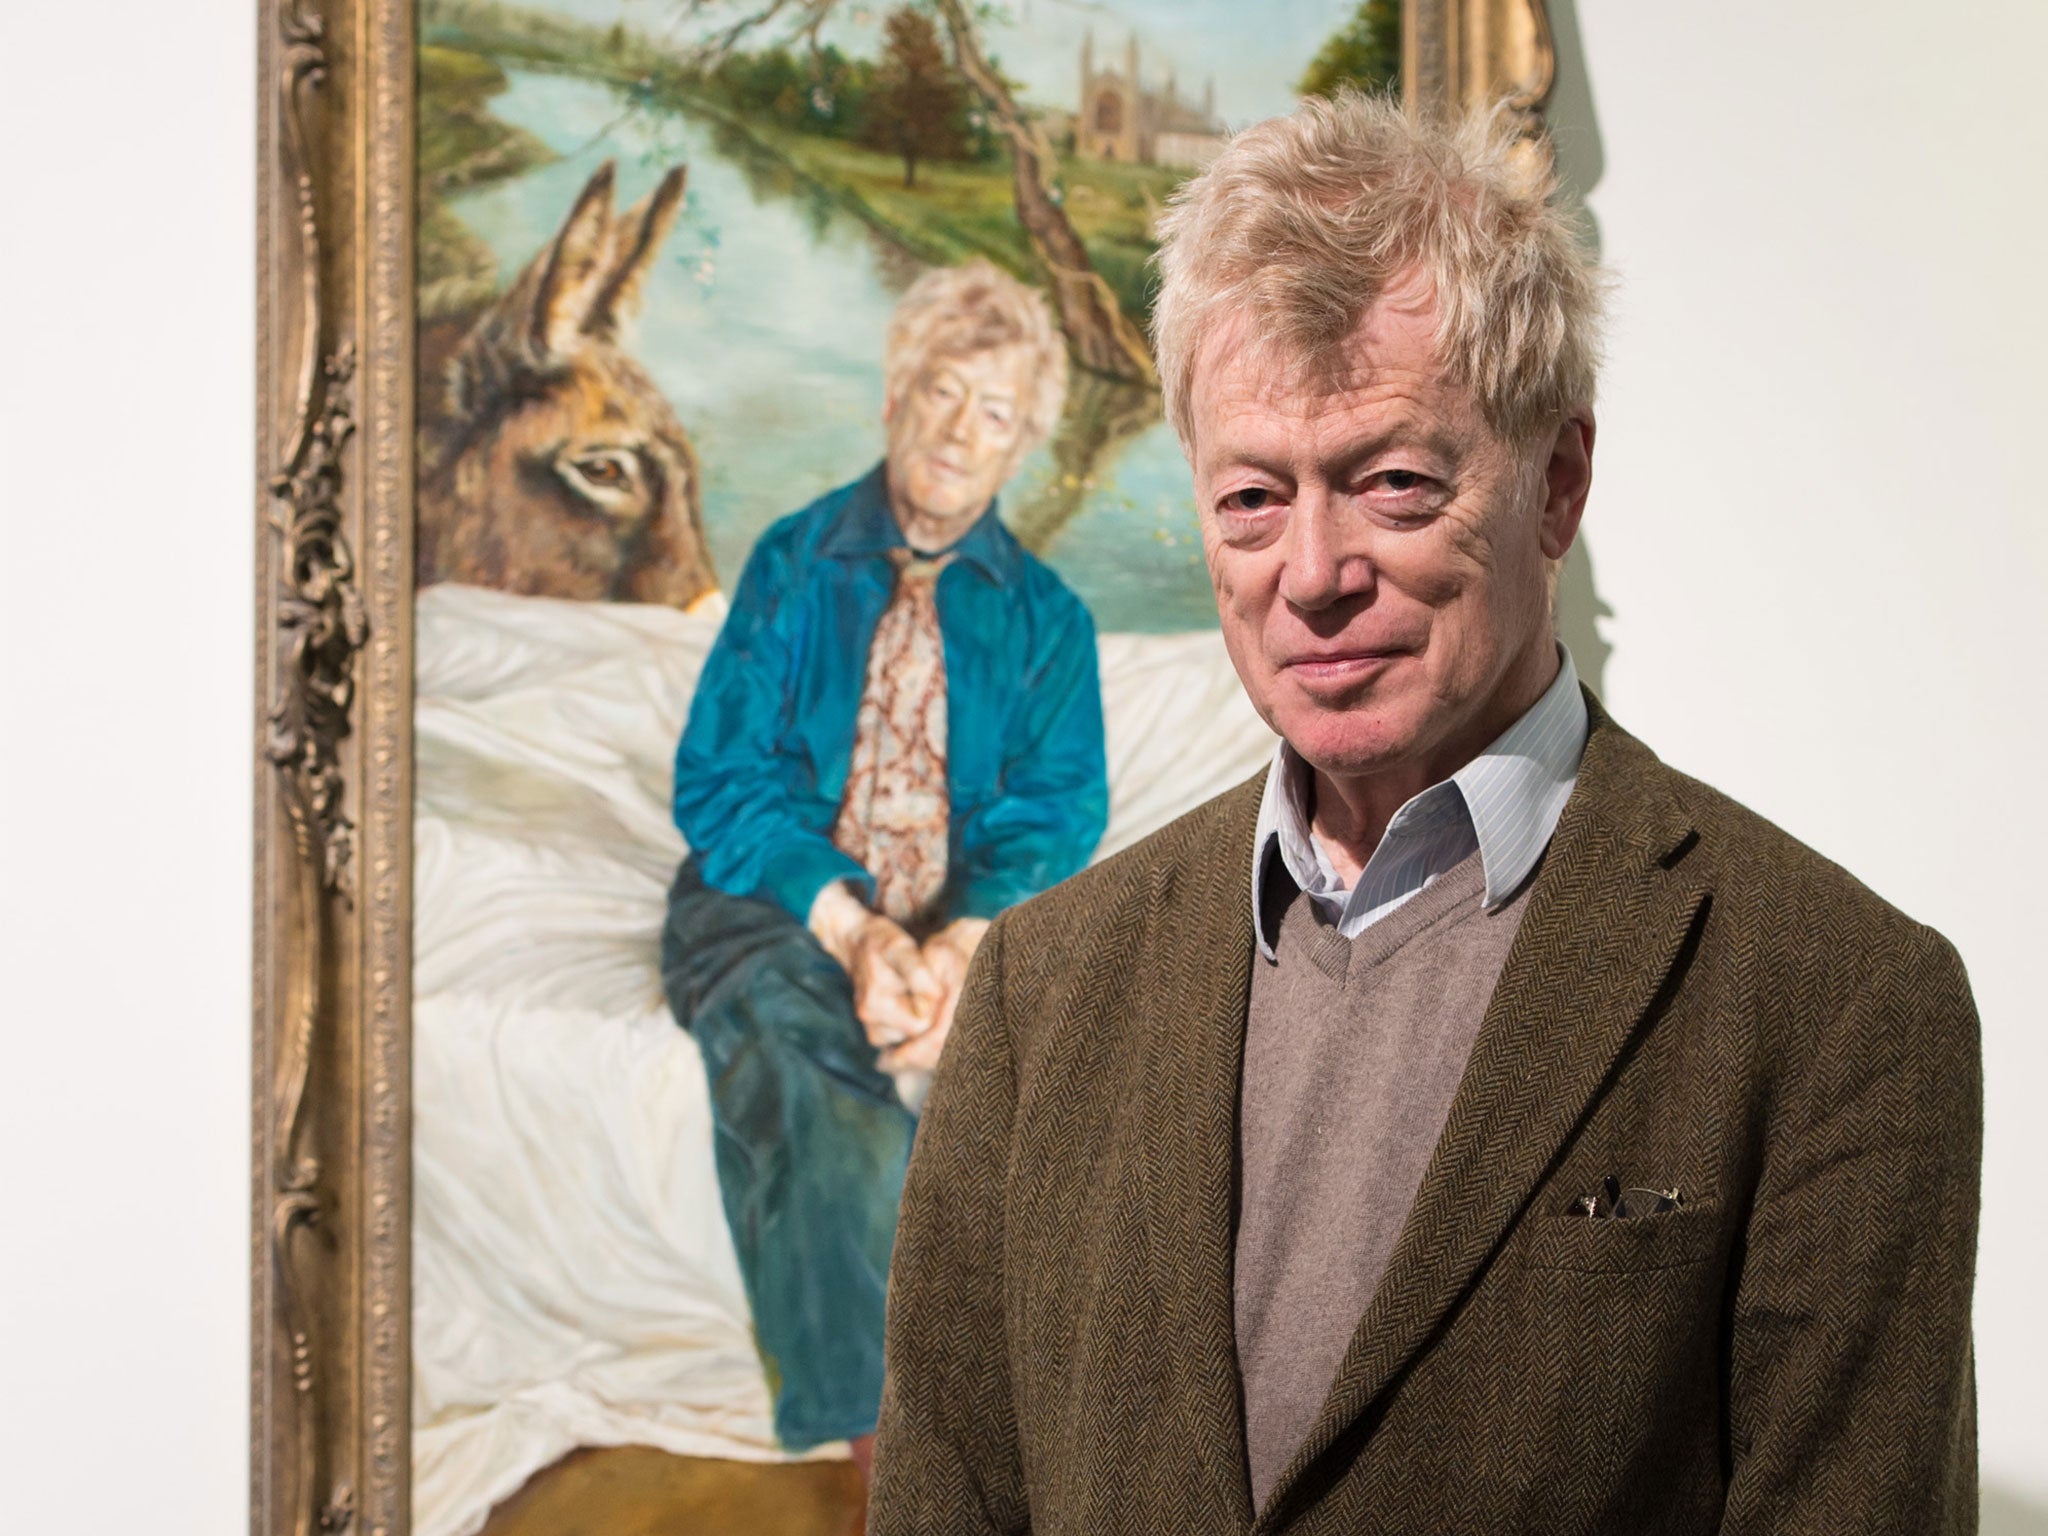 Sir Roger Scruton has in the past made controversial comments on homosexuality and Islam